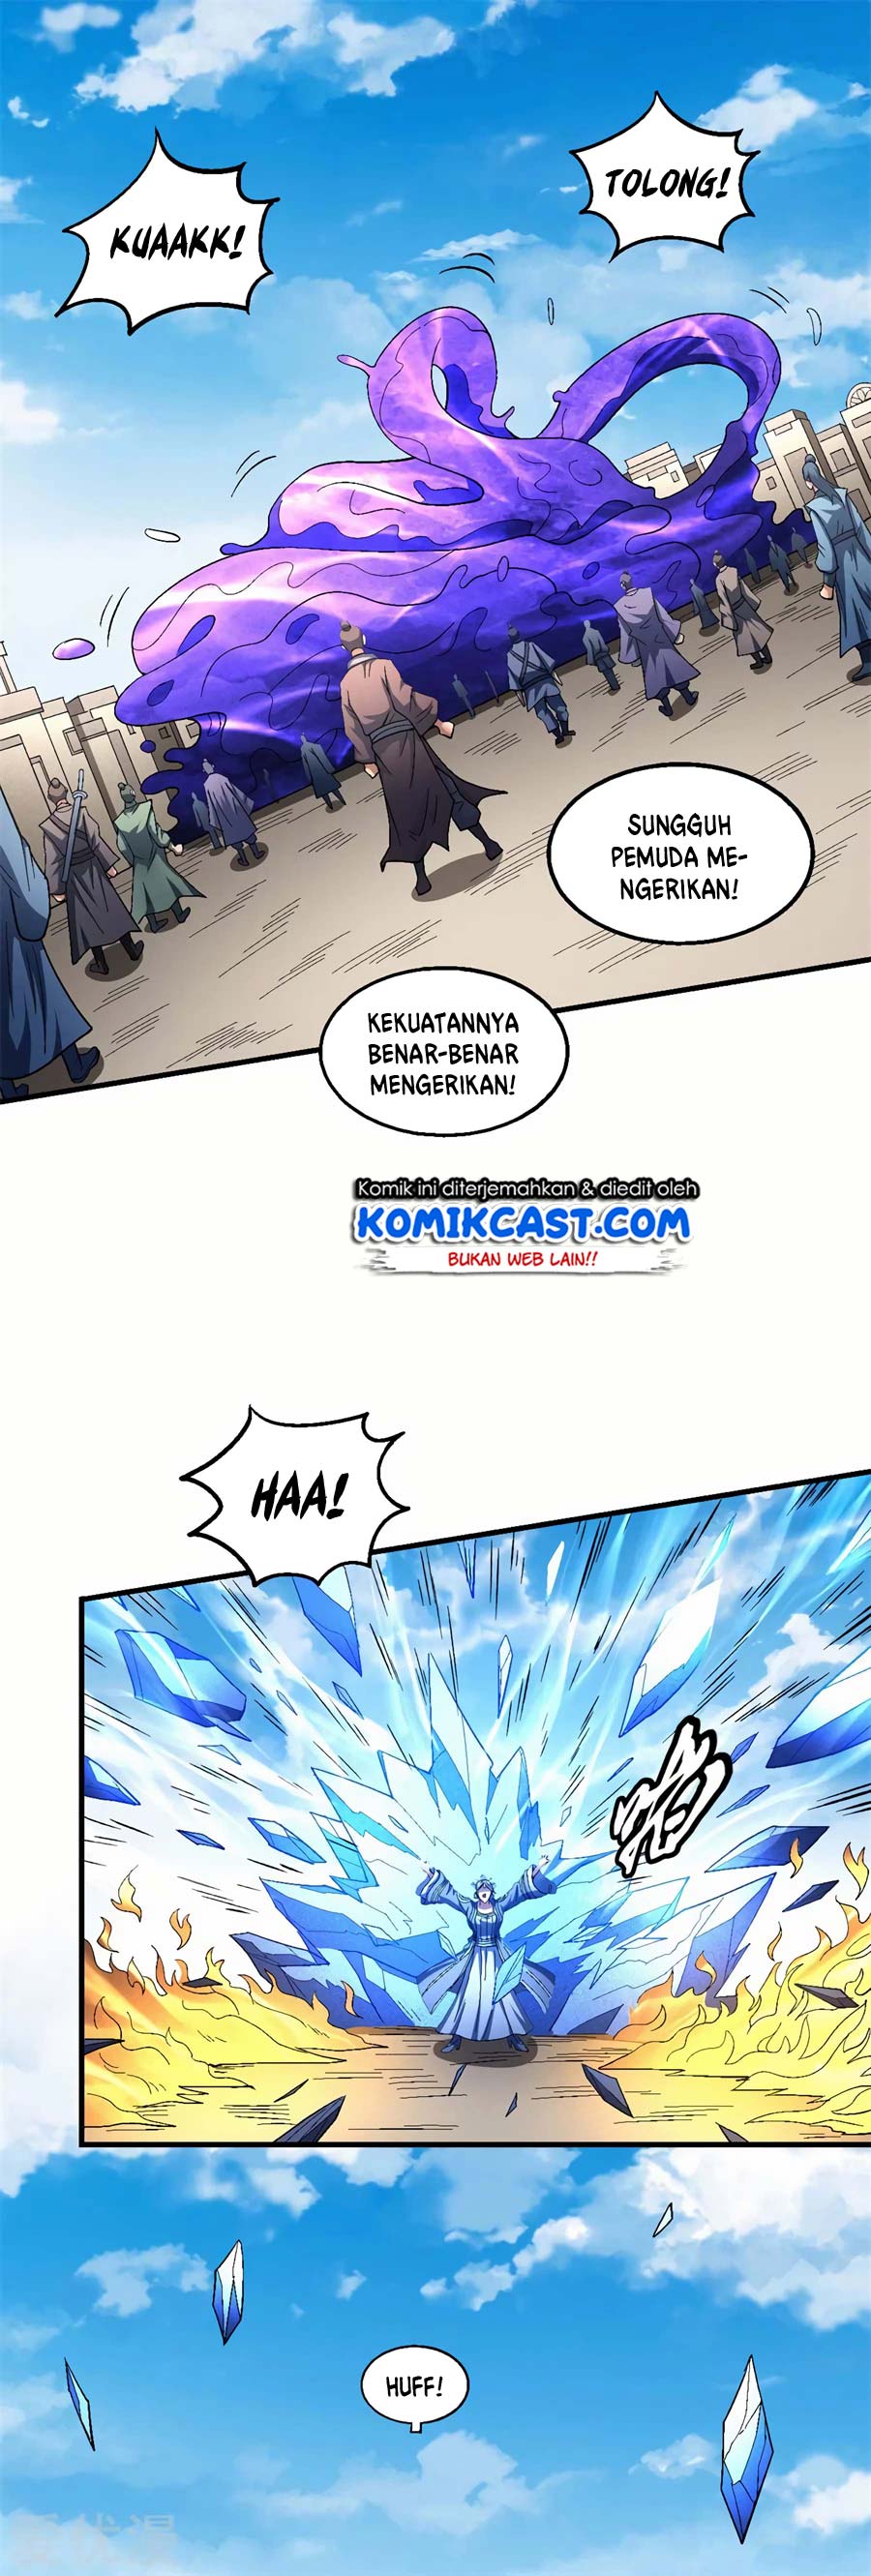 God of Martial Arts Chapter 378